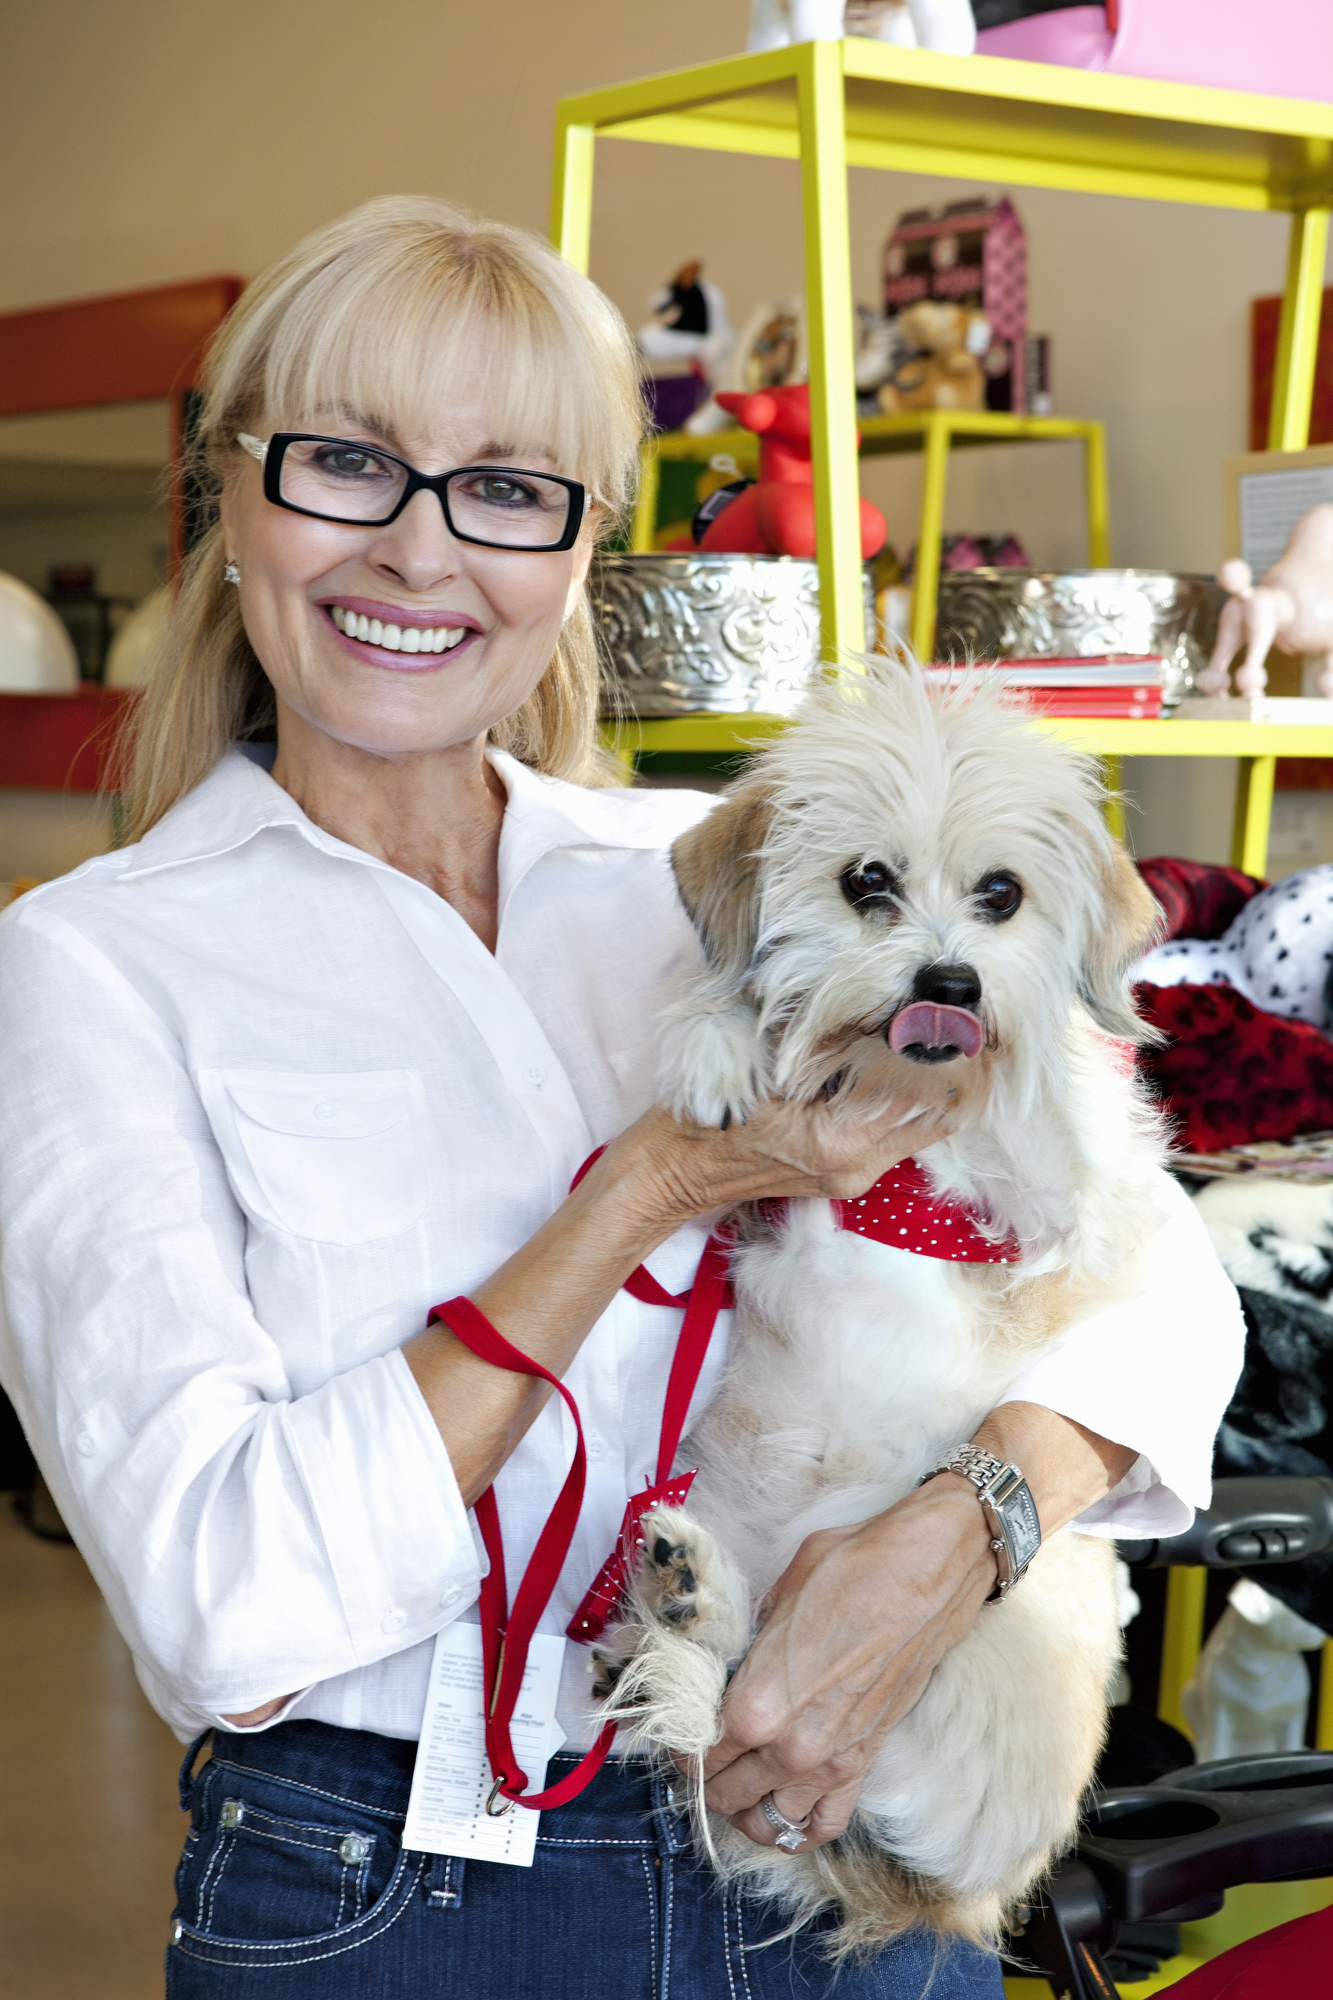 Woman in a white shirt holding a small white dog